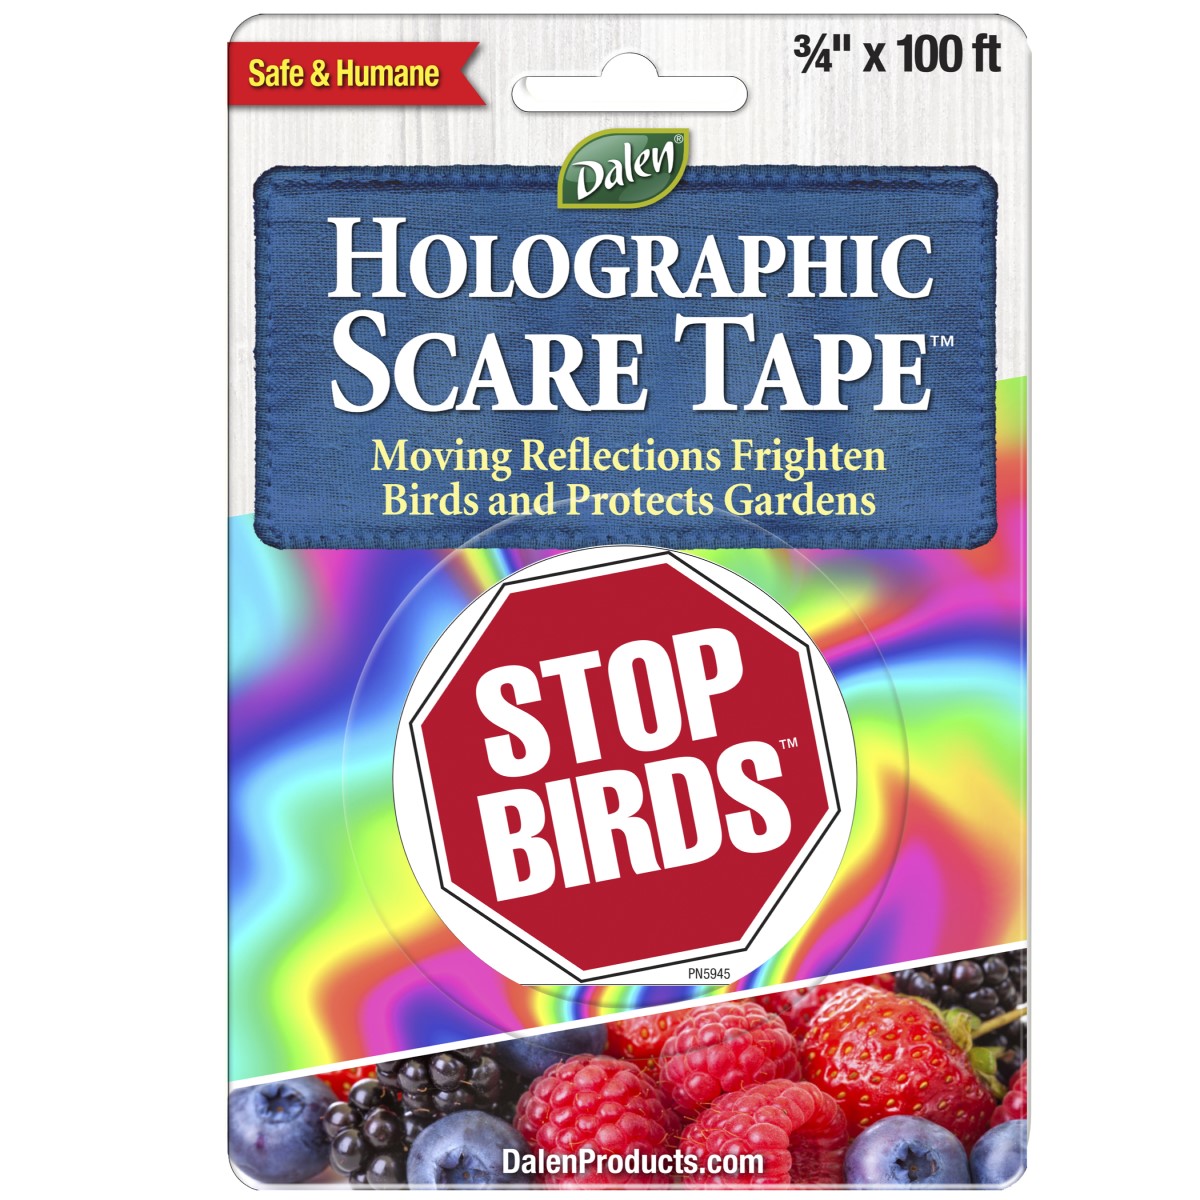 Picture of Holographic Scare Tape 3/4" x 100' Roll